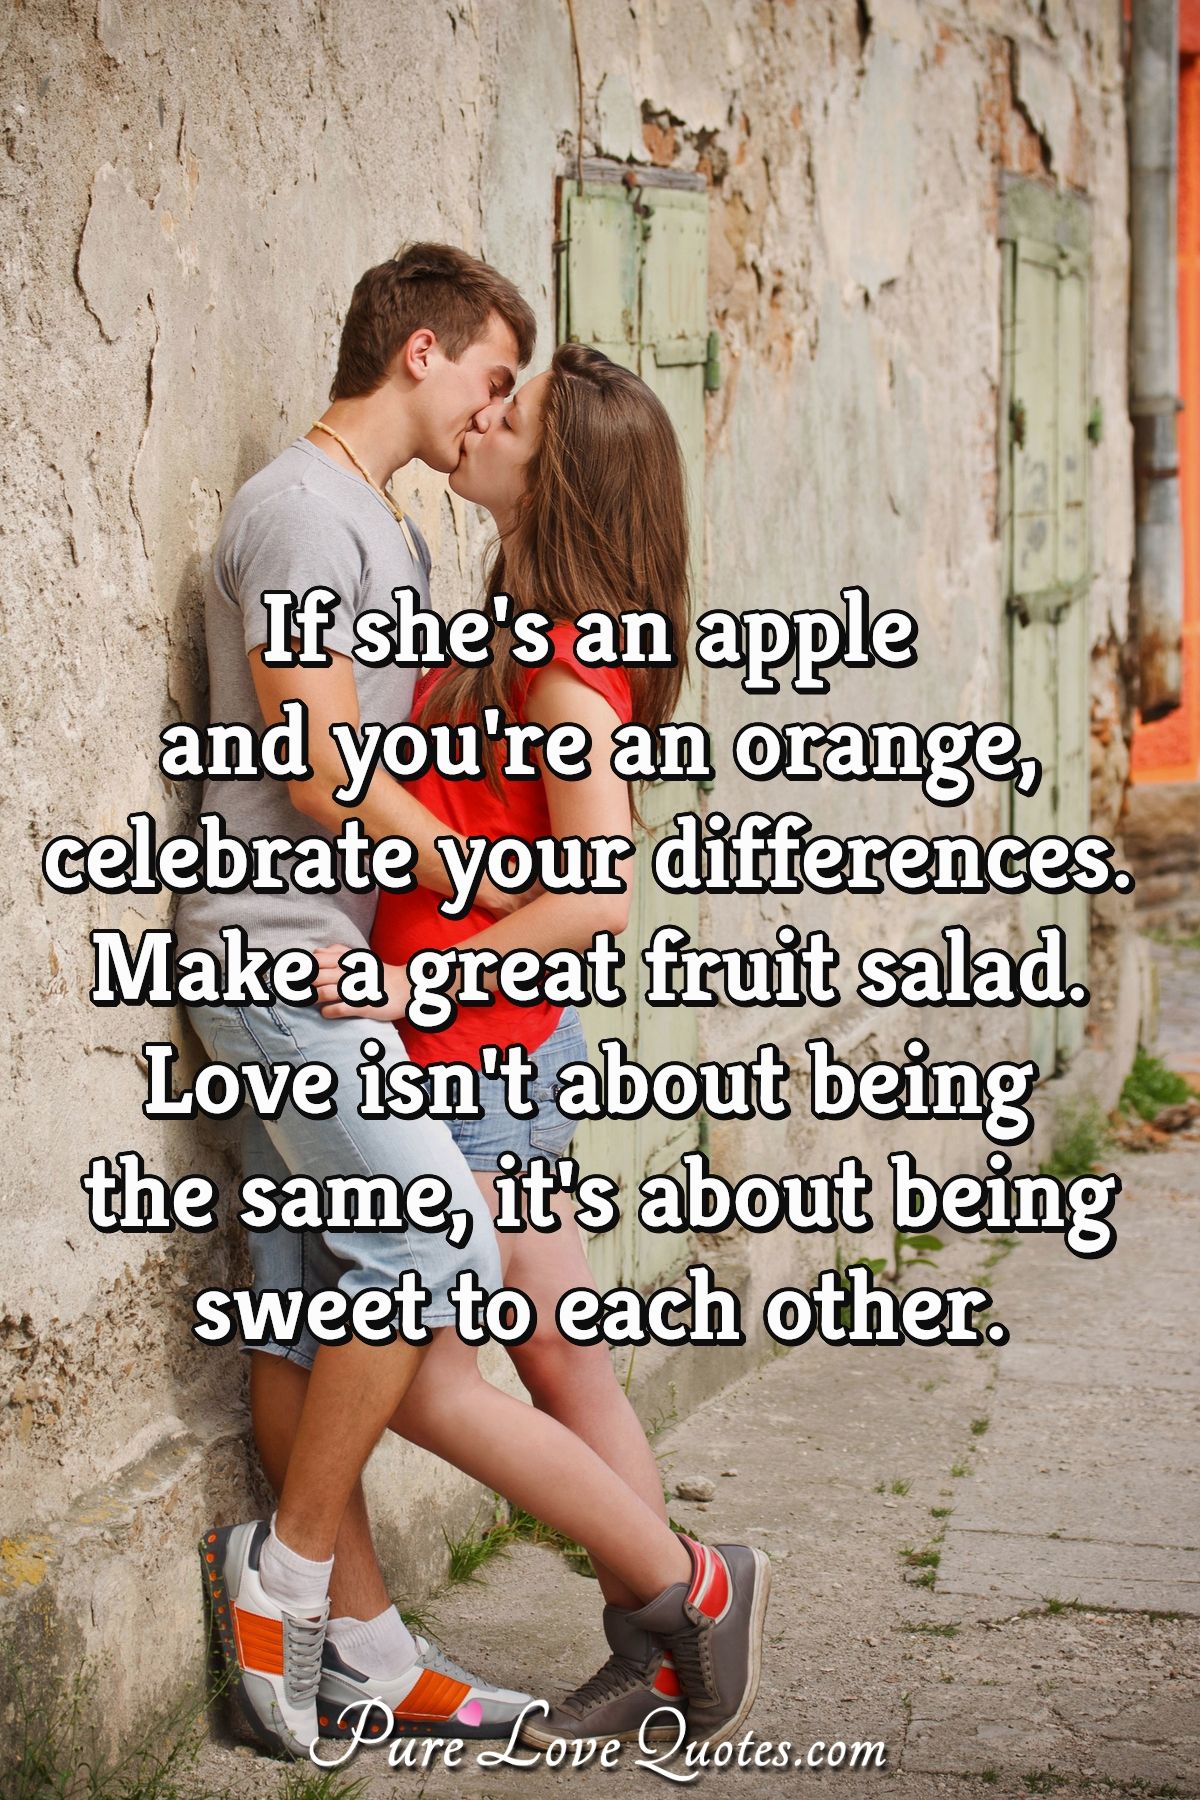 If she's an apple and you're an orange, celebrate your differences. Make a great fruit salad. Love isn't about being the same, it's about being sweet to each other. - Anonymous